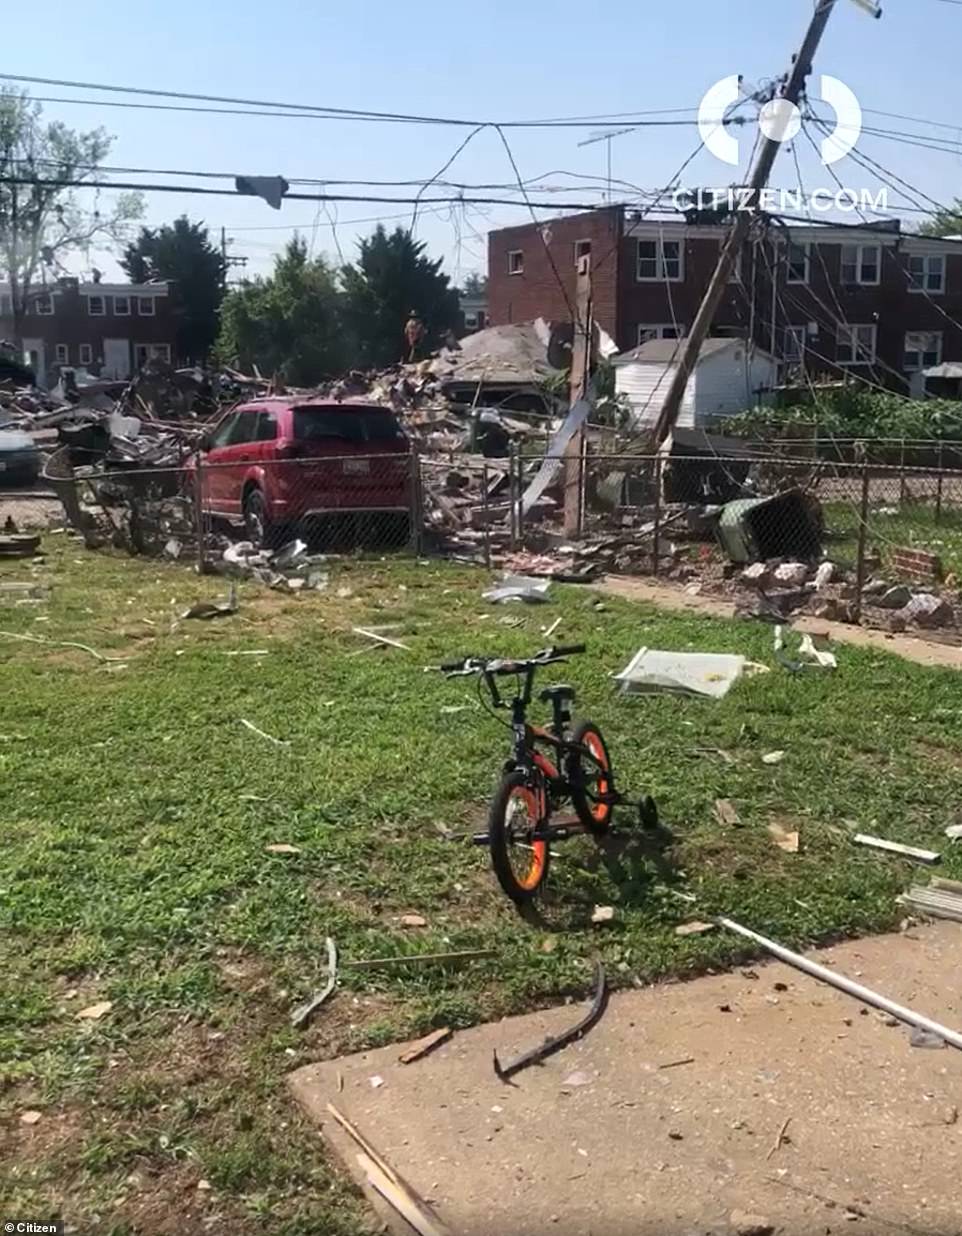 Three homes near Reisterstown Road in Baltimore were destroyed in an explosion Monday morning